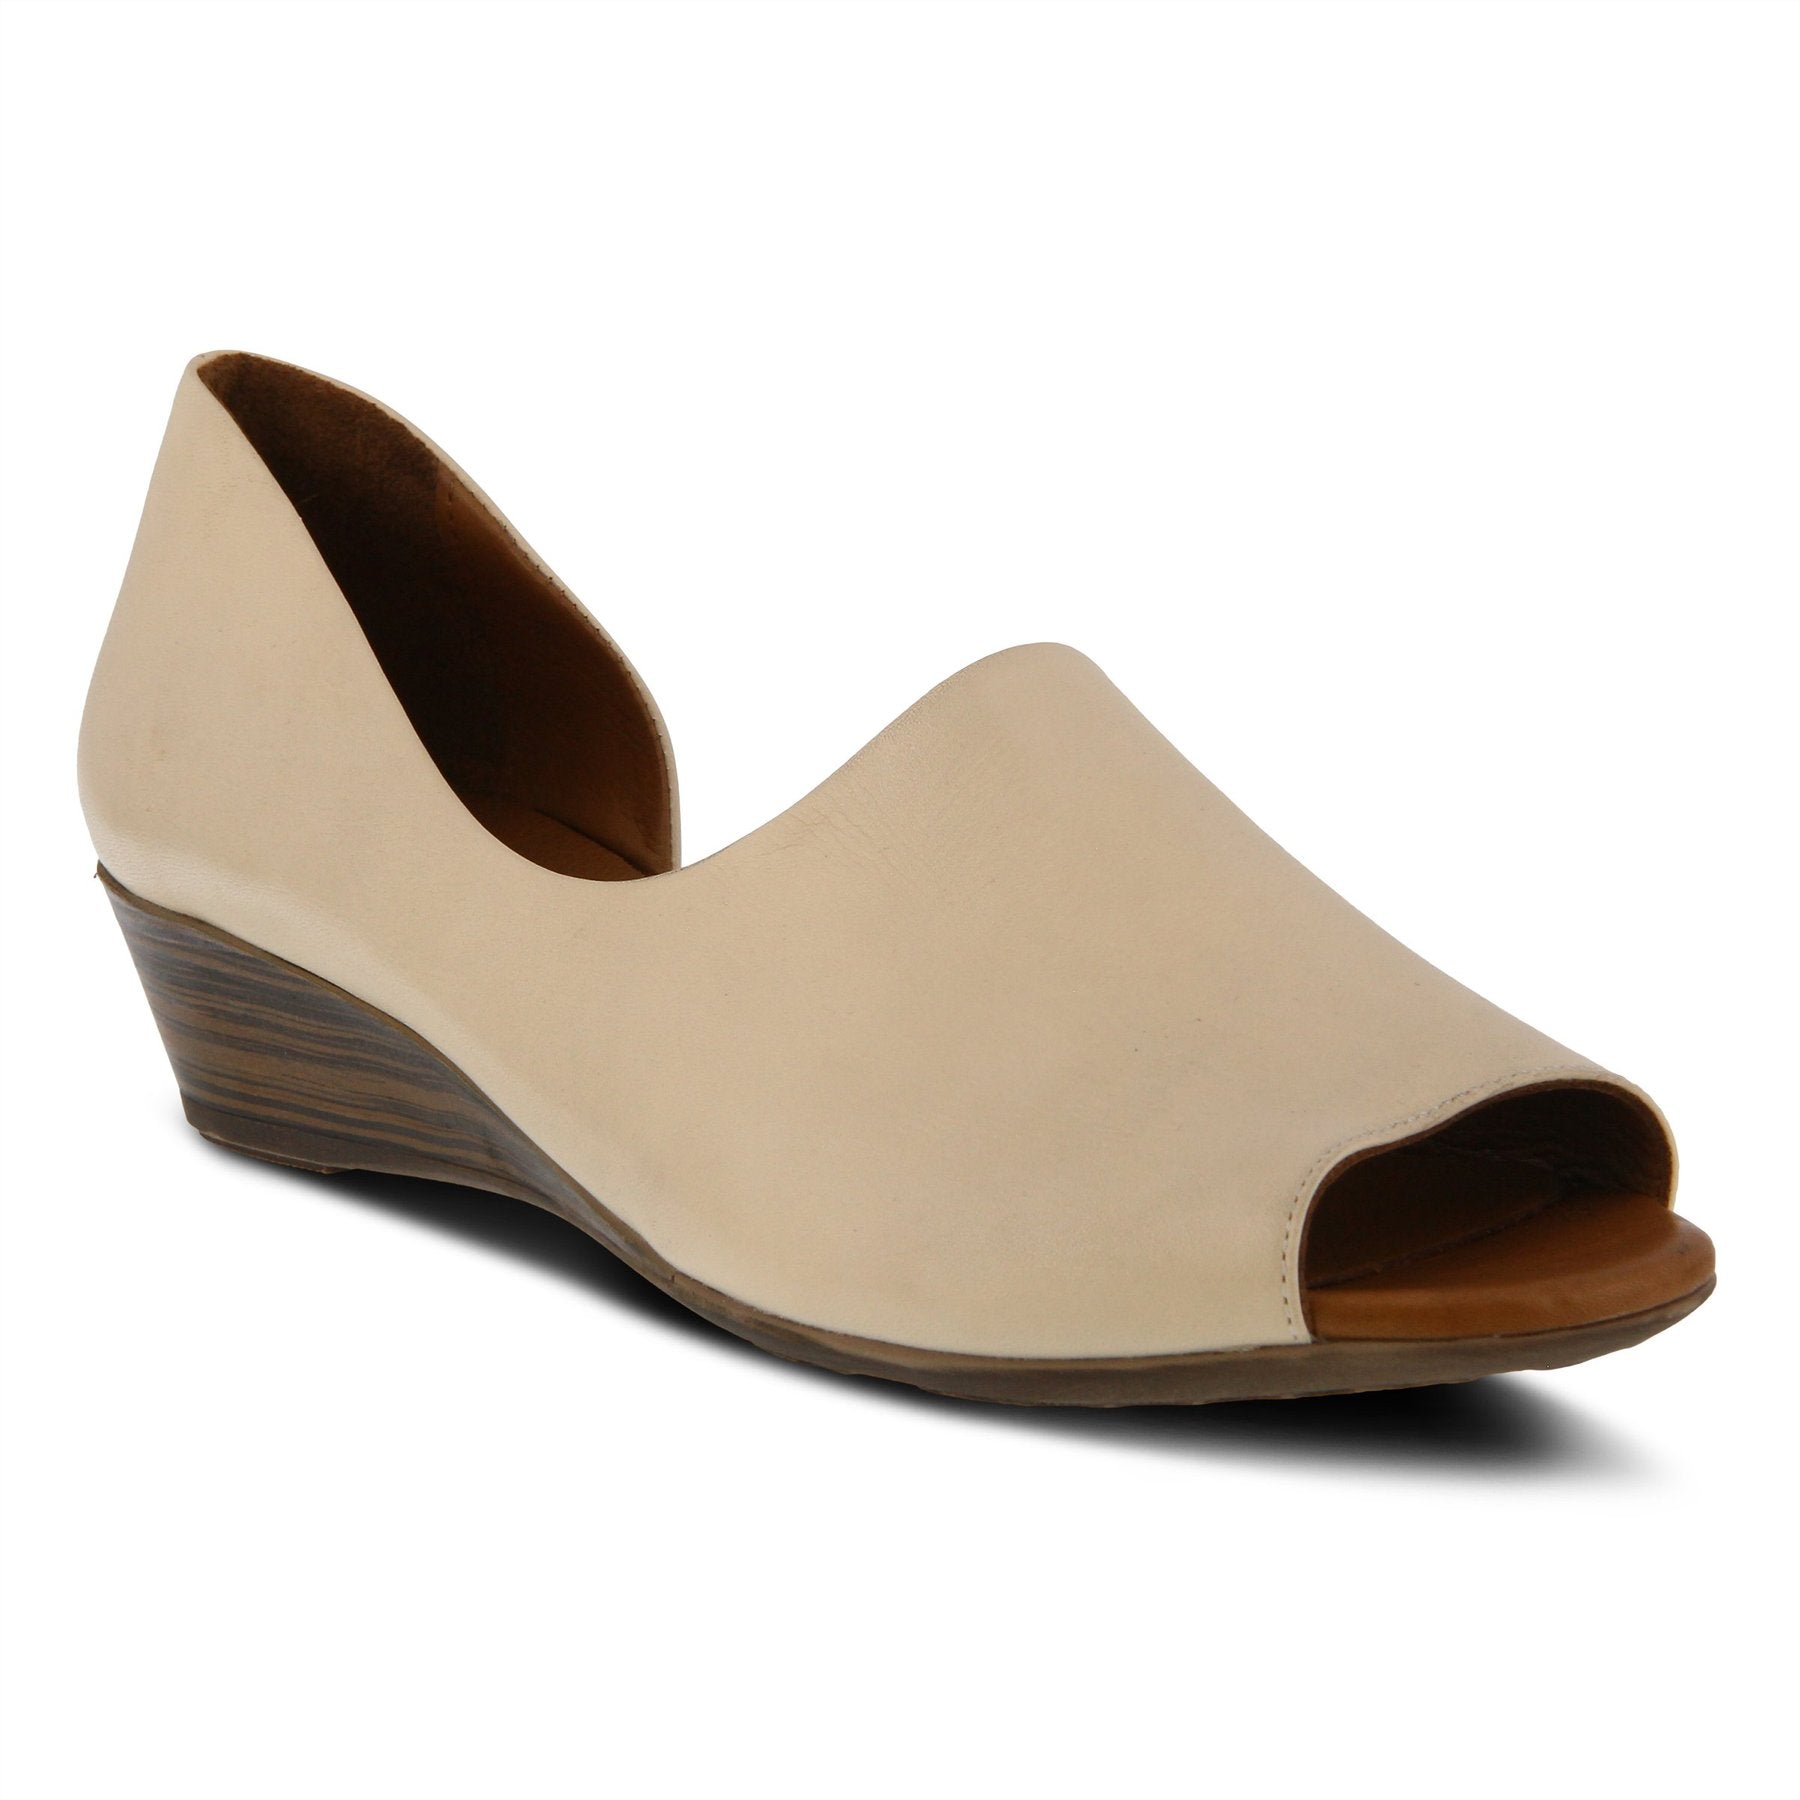 Front, outer side view of the Spring Step Lesamarie Shoe. This shoe is a light beige with a tan leather inner and slight wedge heel. The outer side covers the foot while in inner side reveals the arch. This shoe is also open toed.